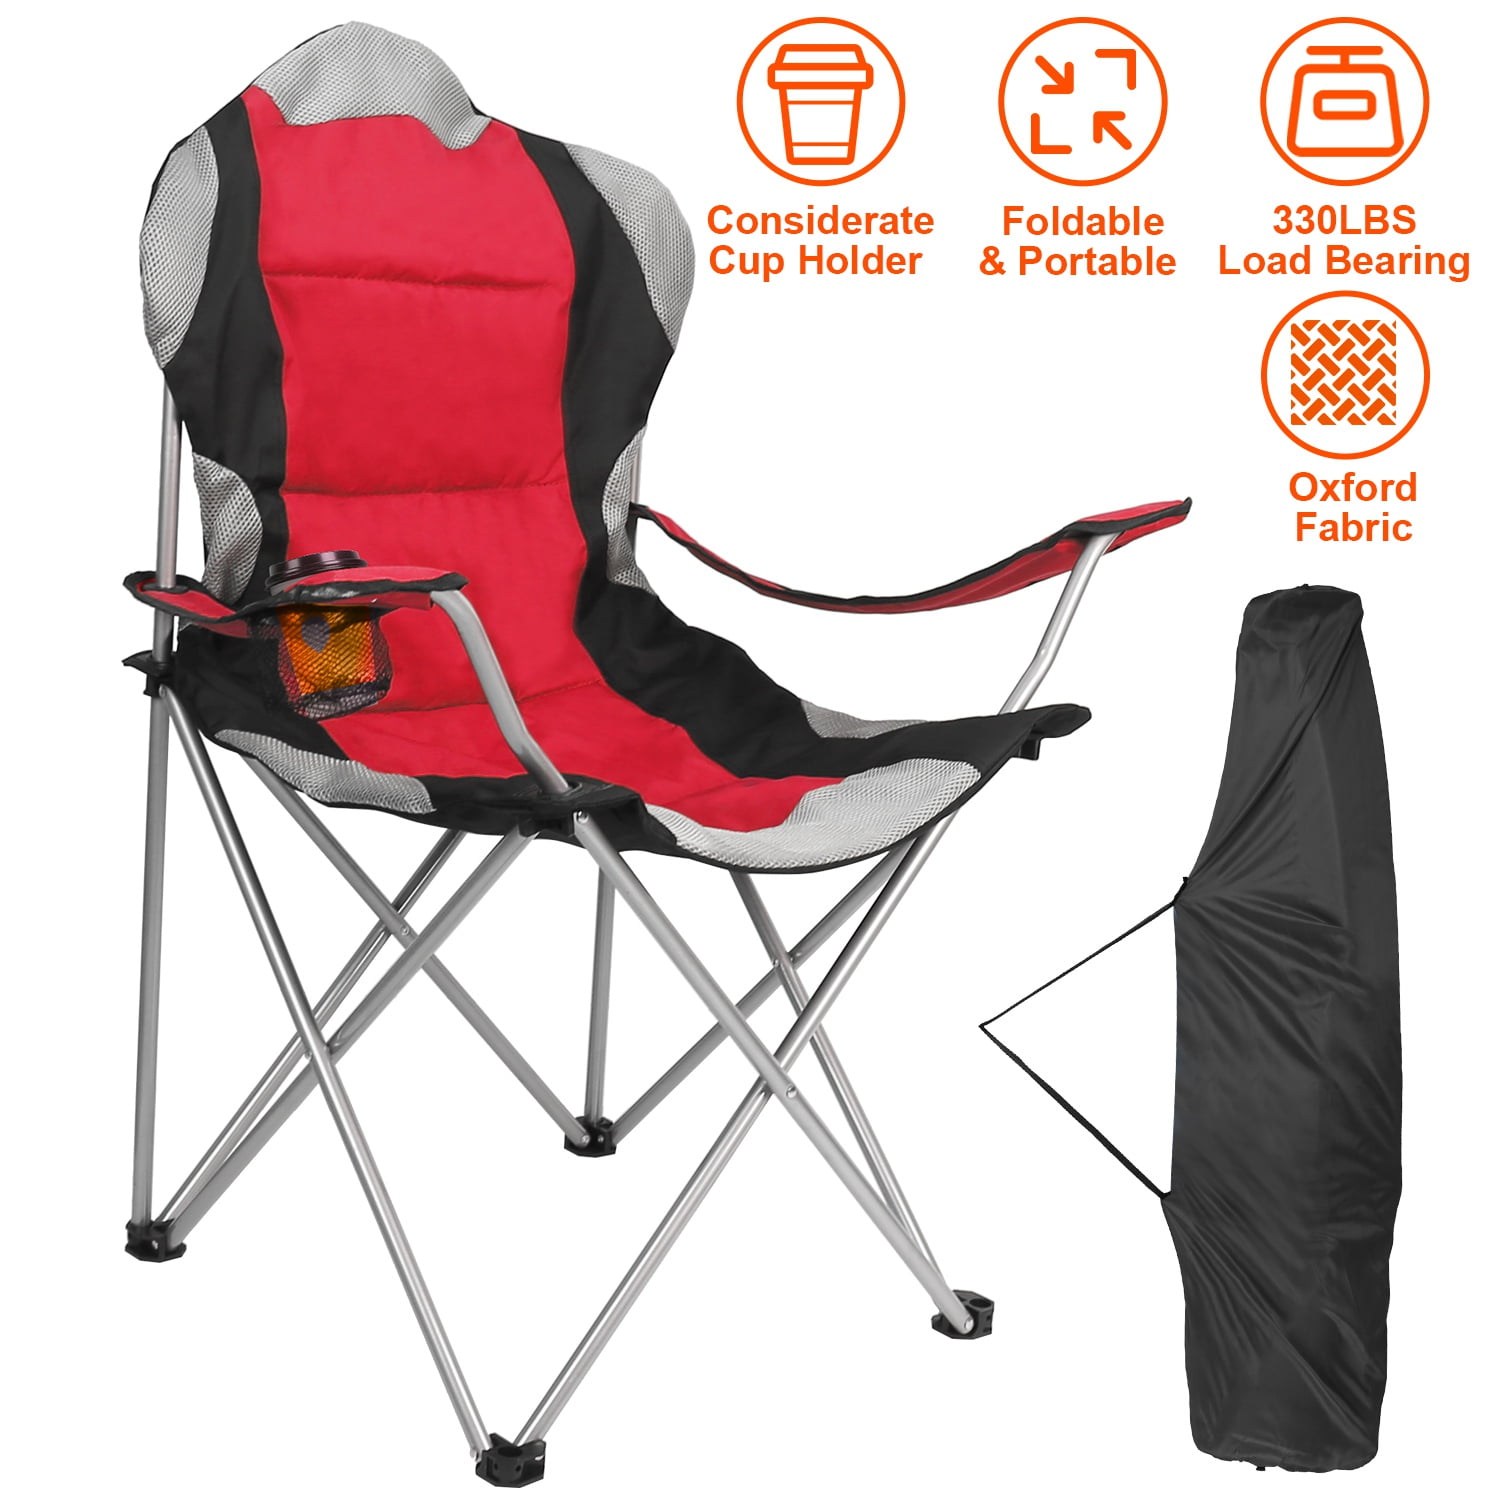  VINGLI Oversized Fishing Chair Heavy Duty Support 440 LBS, 160°  Freely Adjustable Reclining Folding Chairs, Lounge Travel Outdoor Seat with  High Back for Fishing Camping or Leisure : Sports & Outdoors